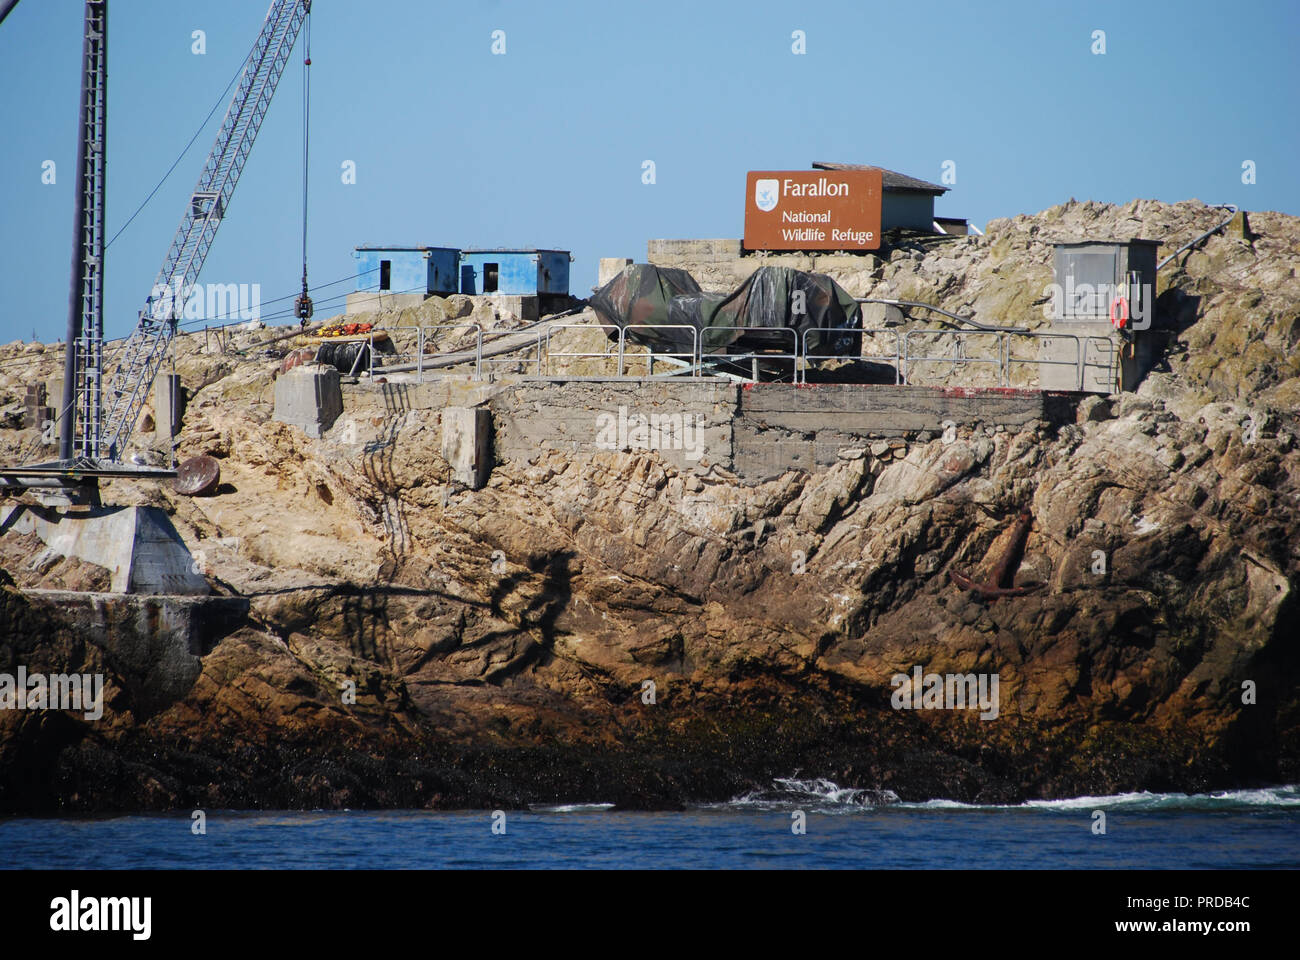 The crane and boat platform used to lift researchers and supplies onto Southeast Farallon Island. Stock Photo